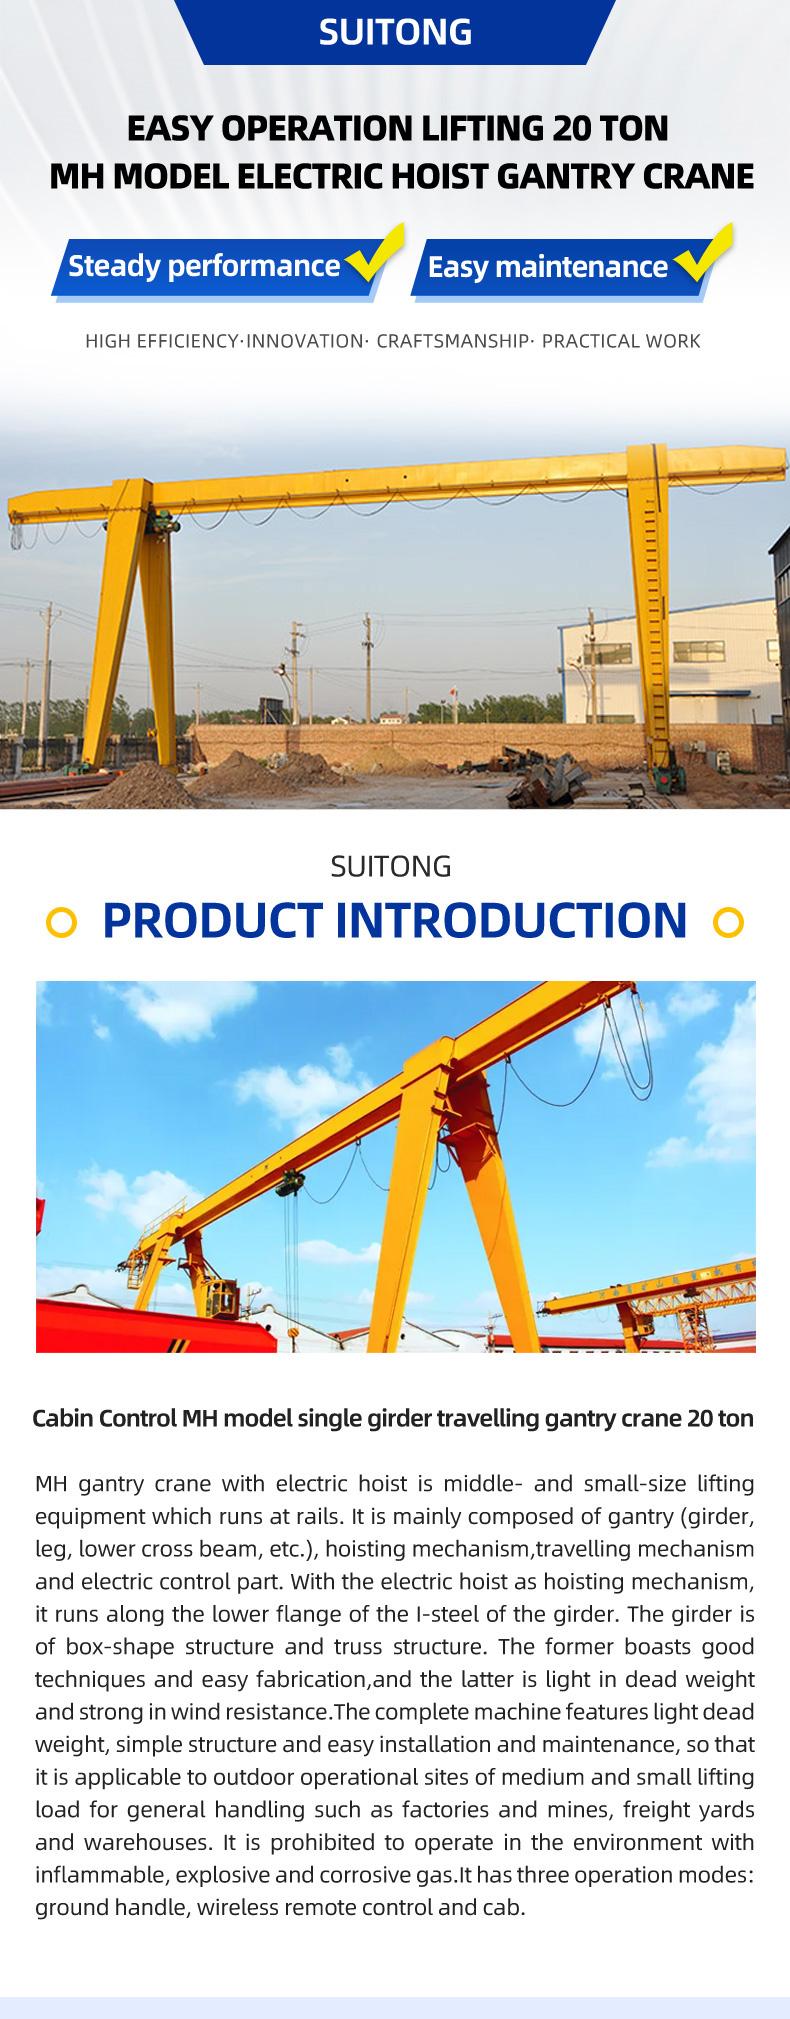 Cabin control electric mobile rail single beam gantry crane with steel wire rope hoist